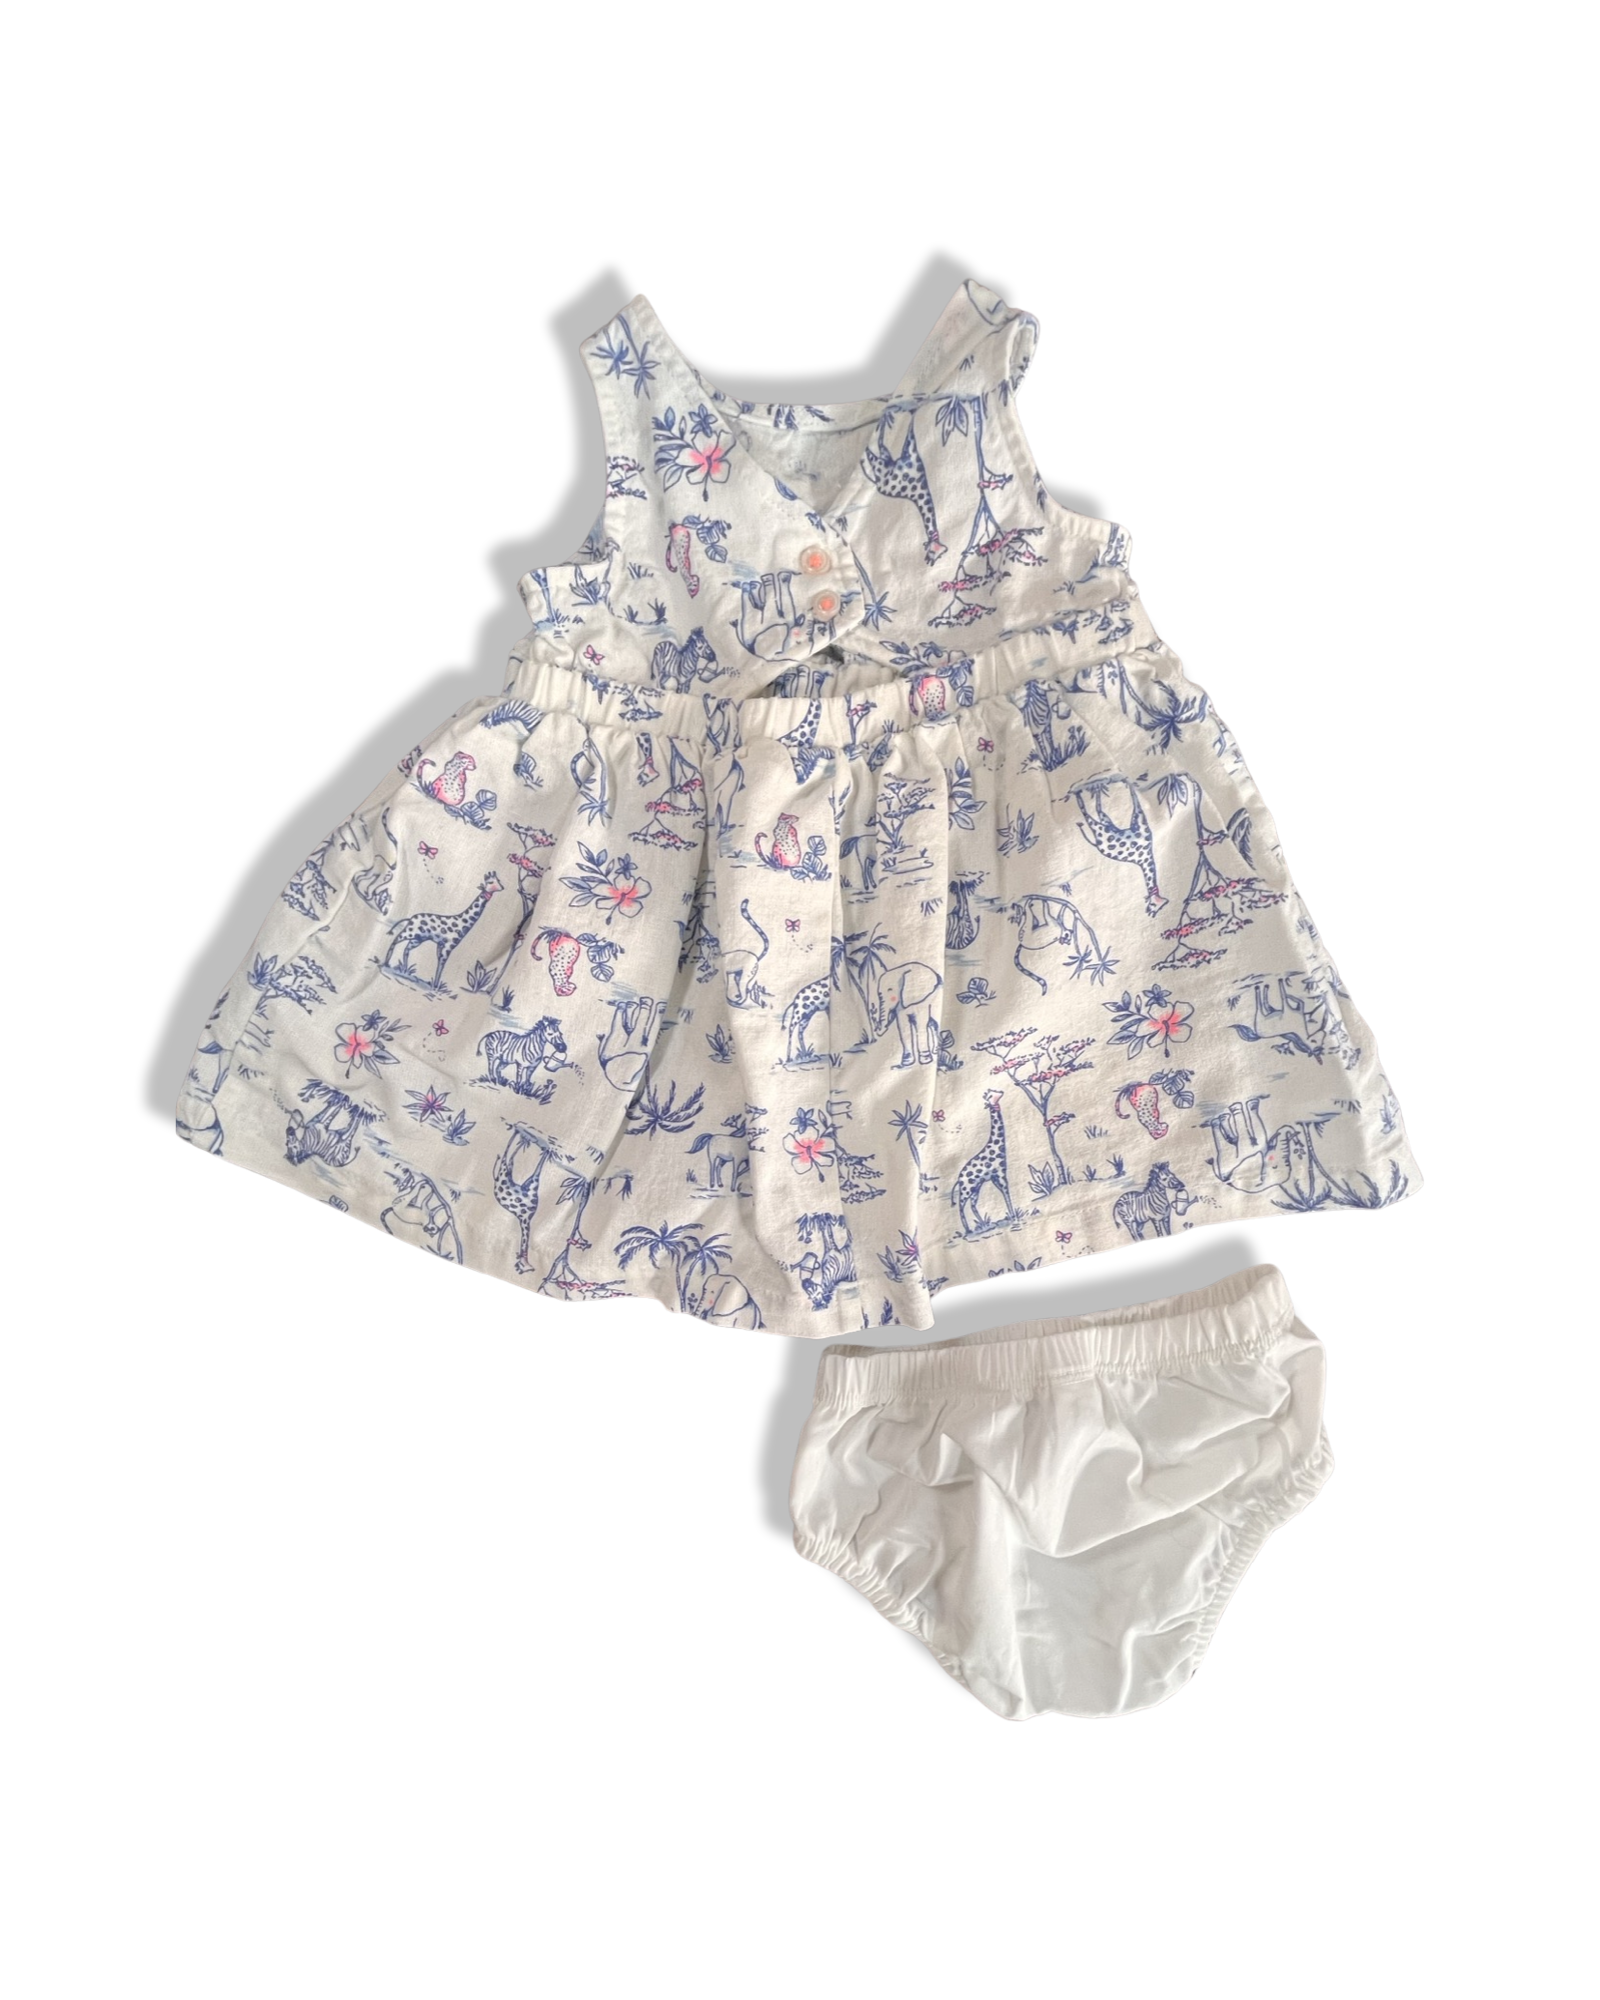 Carter's White and Blue Animal Dress with Diaper Cover (6M)